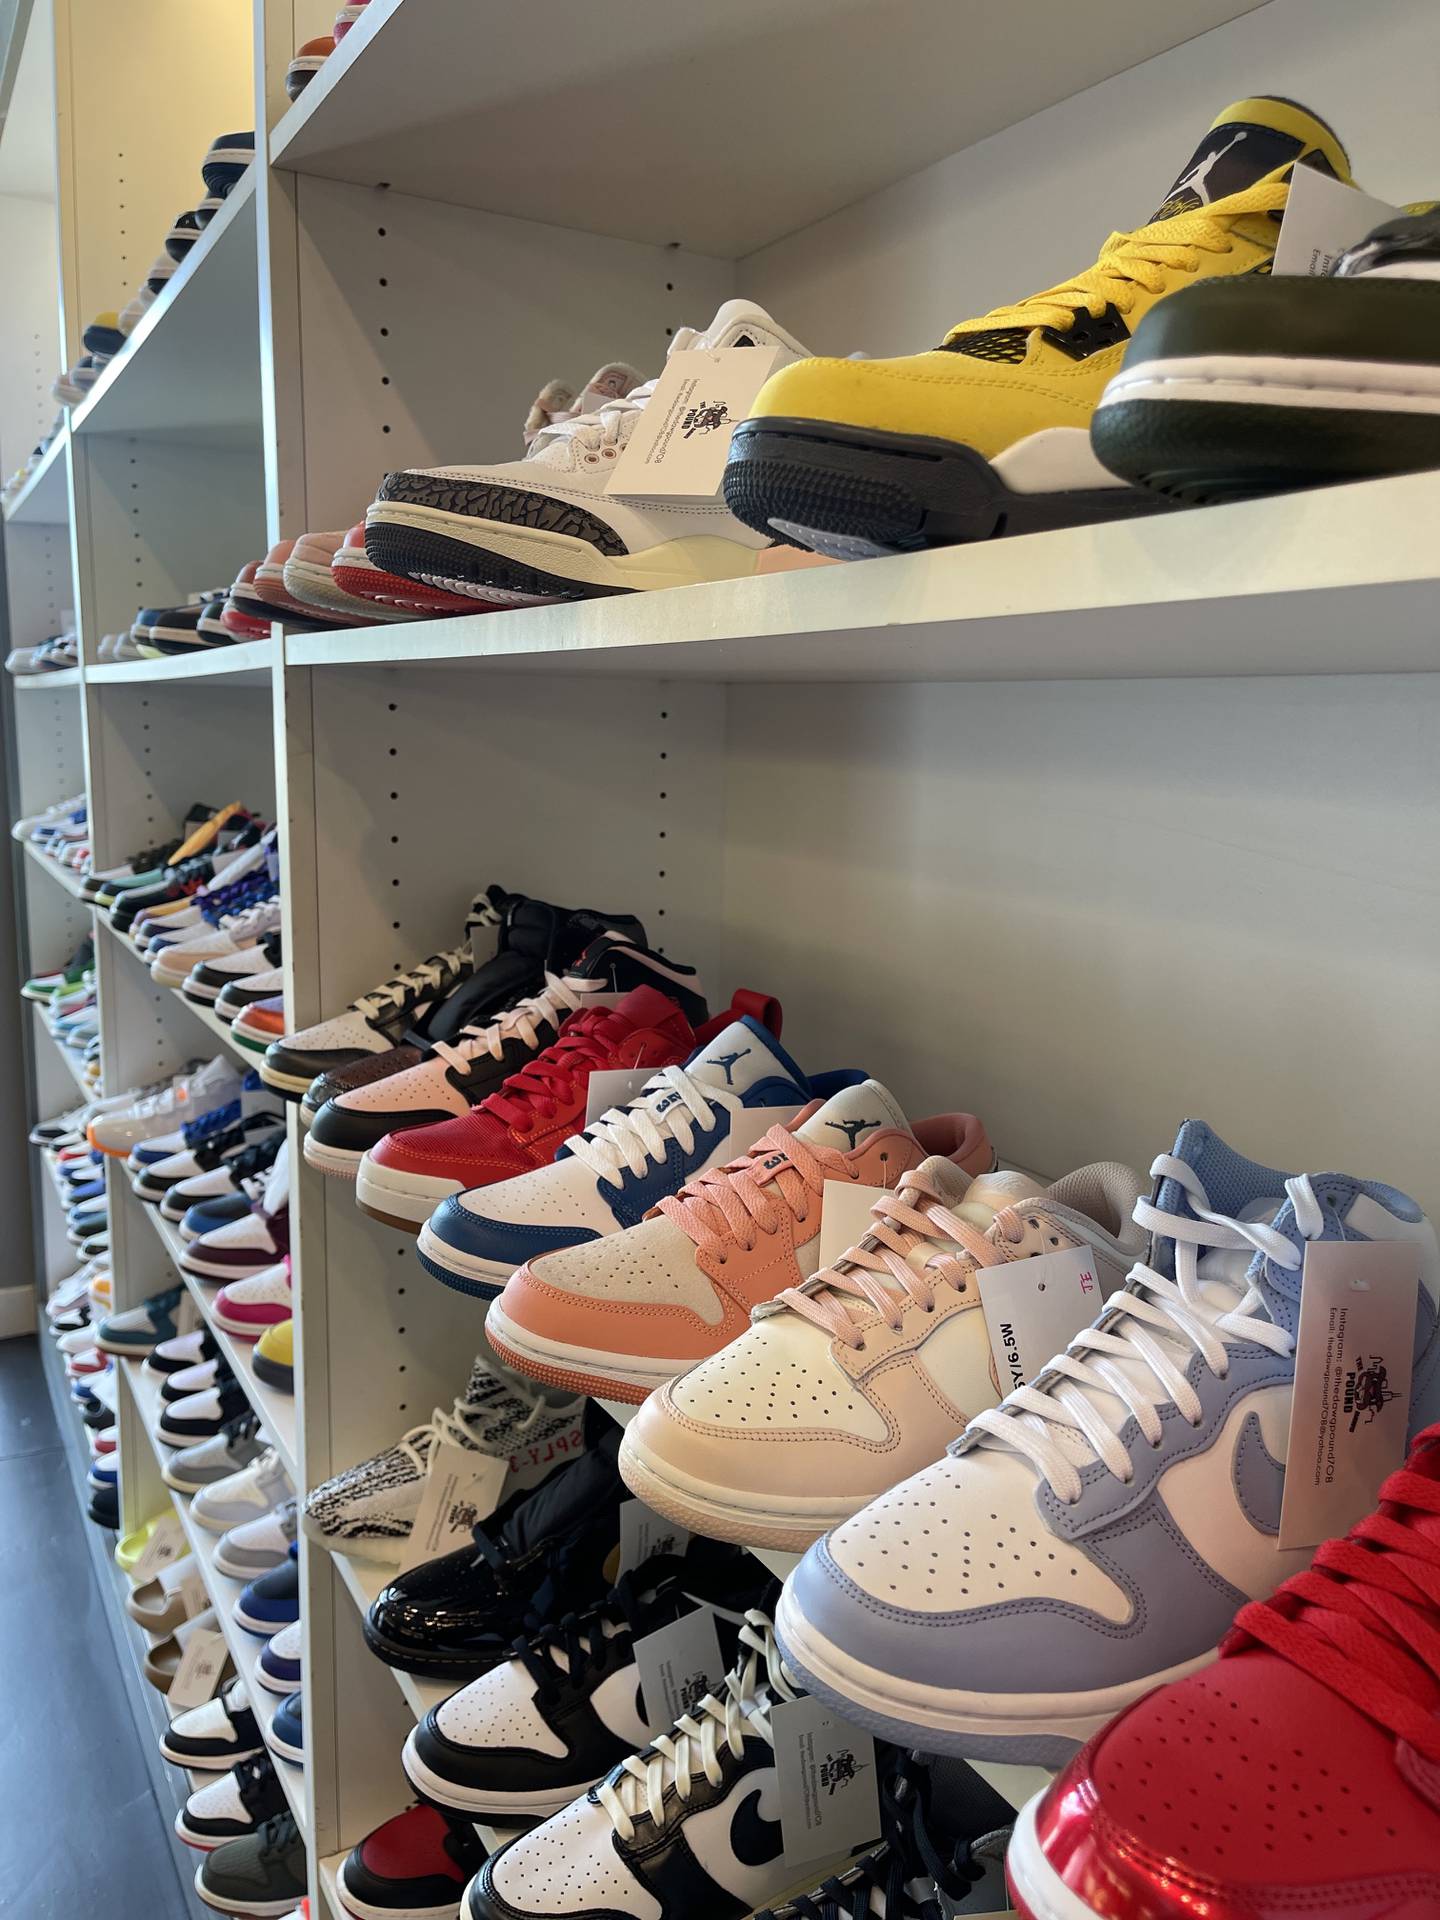 Specialty limited edition sneakers in stock at The Dawg House, 206 Commons Drive, a new store that opened in the Geneva Commons.